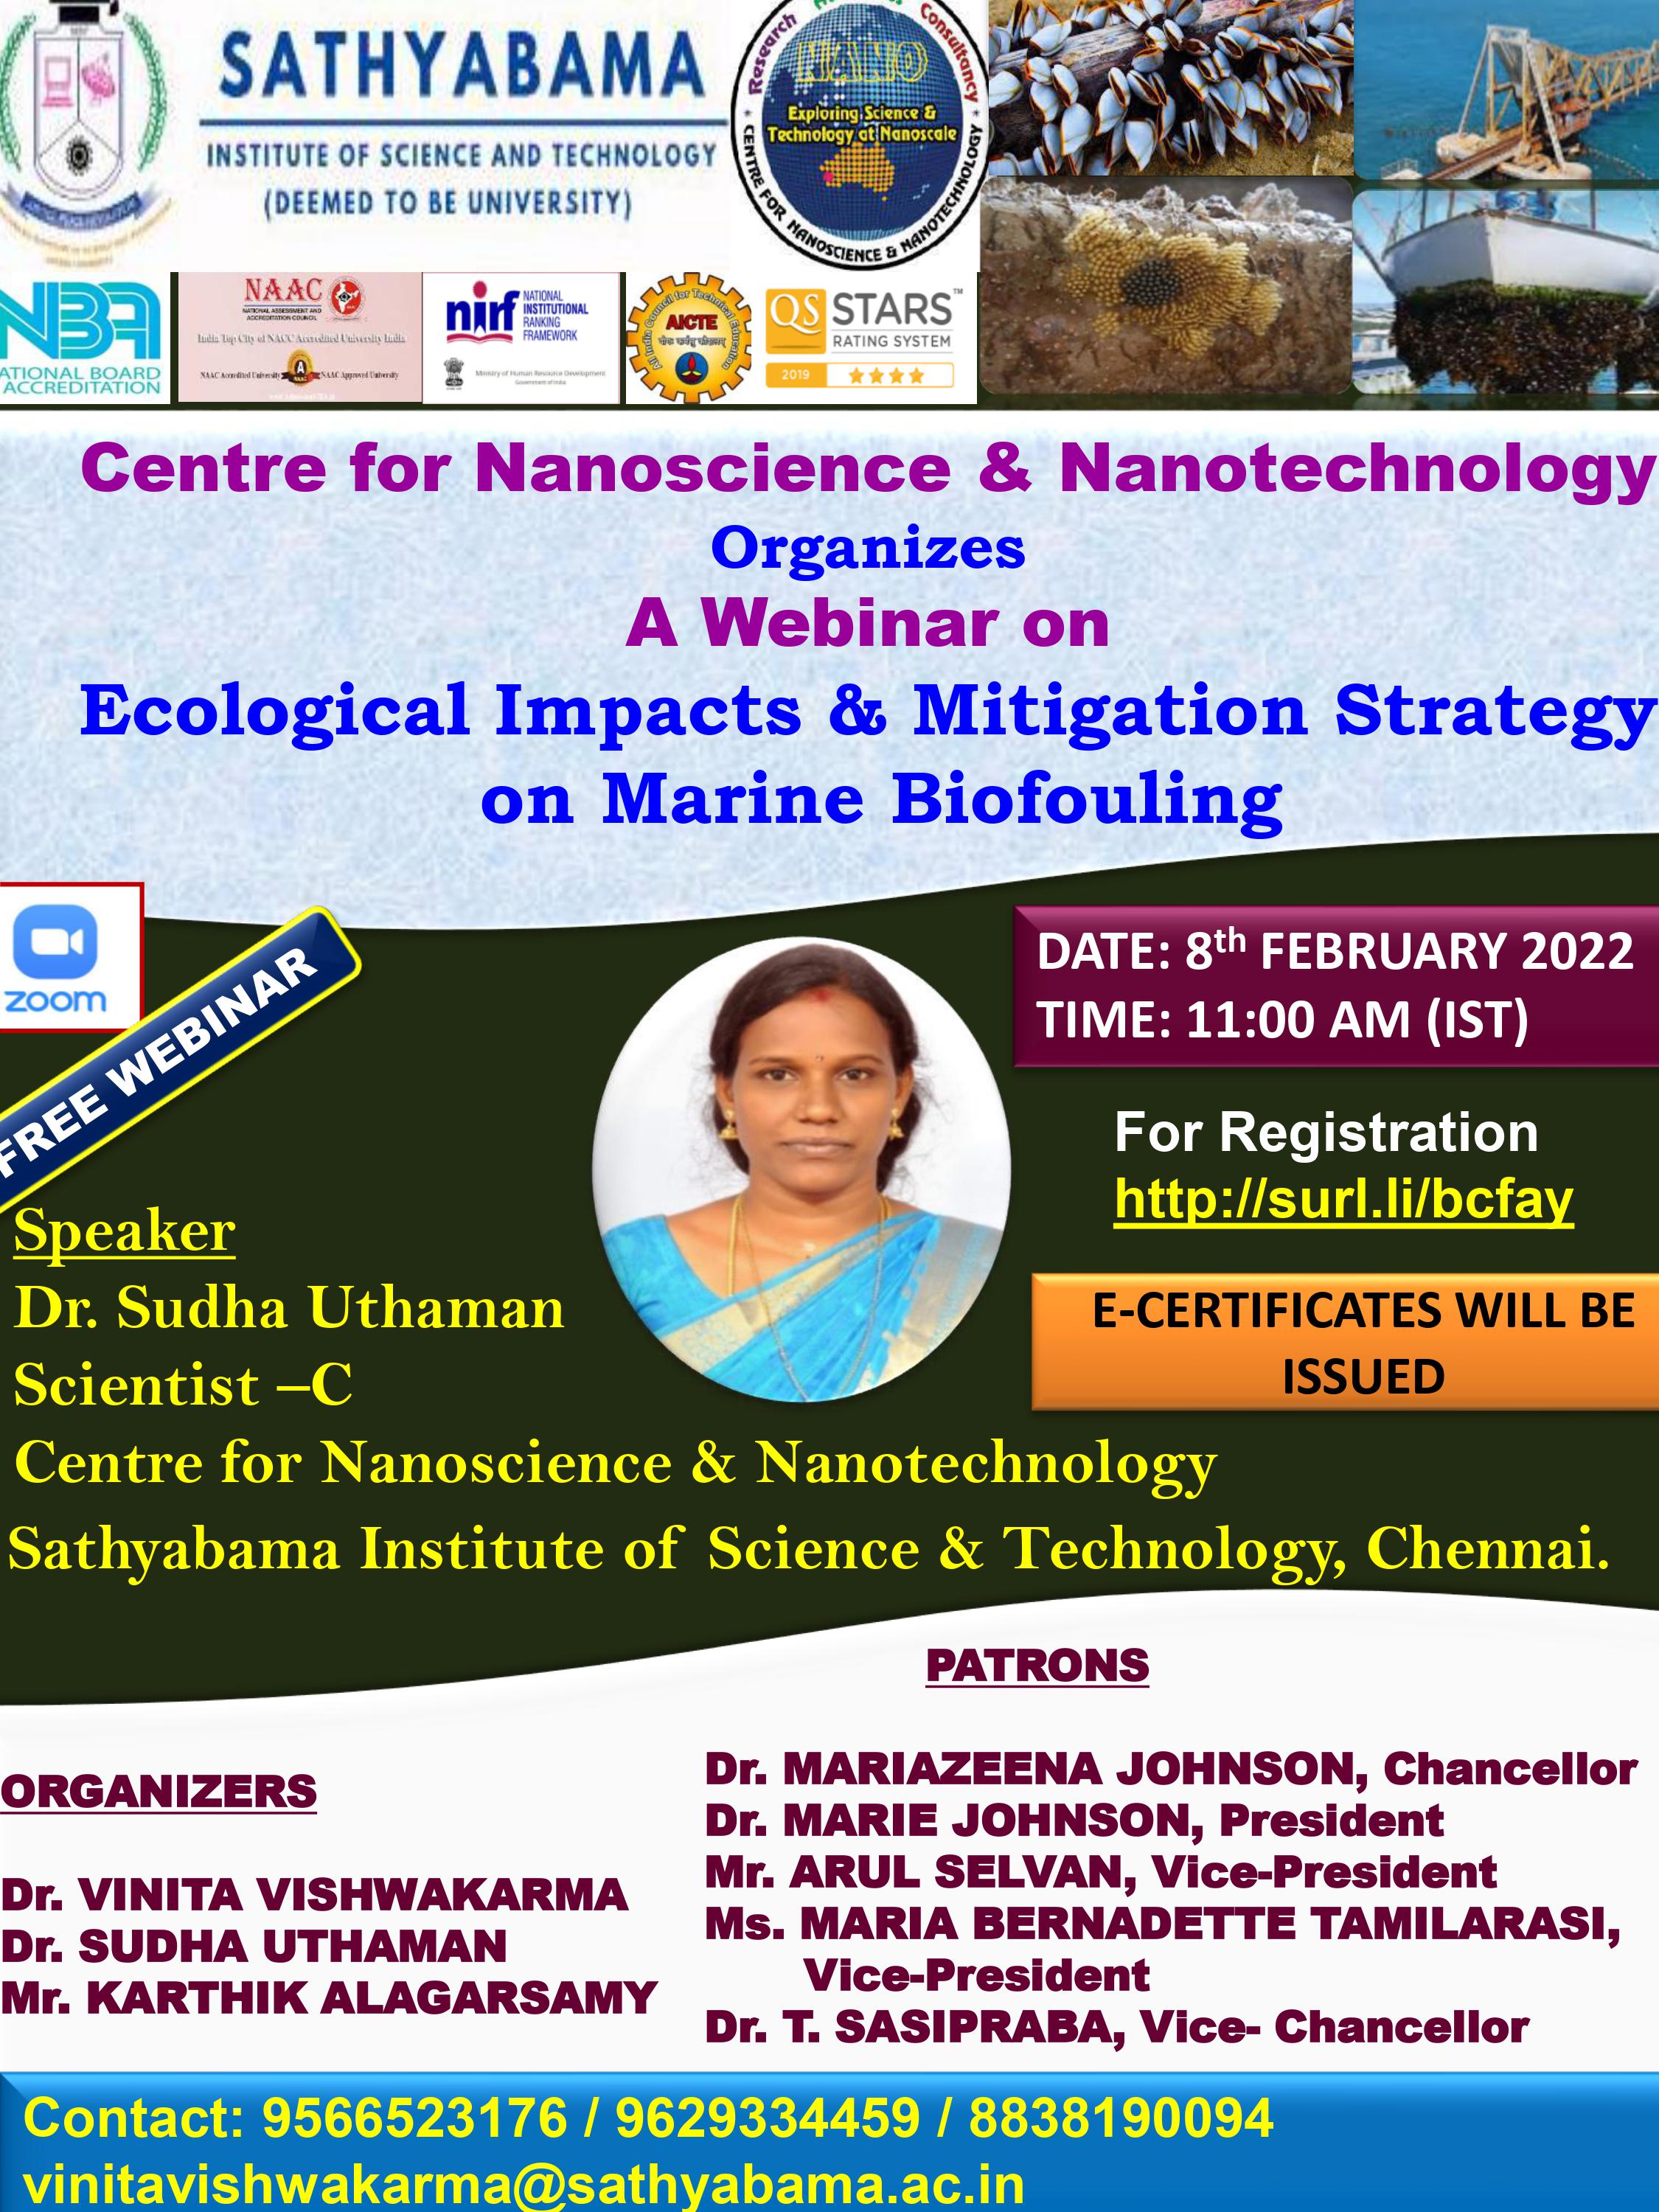 A Webinar on Ecological Impacts and Mitigation Strategy on Marine Biofouling 2022